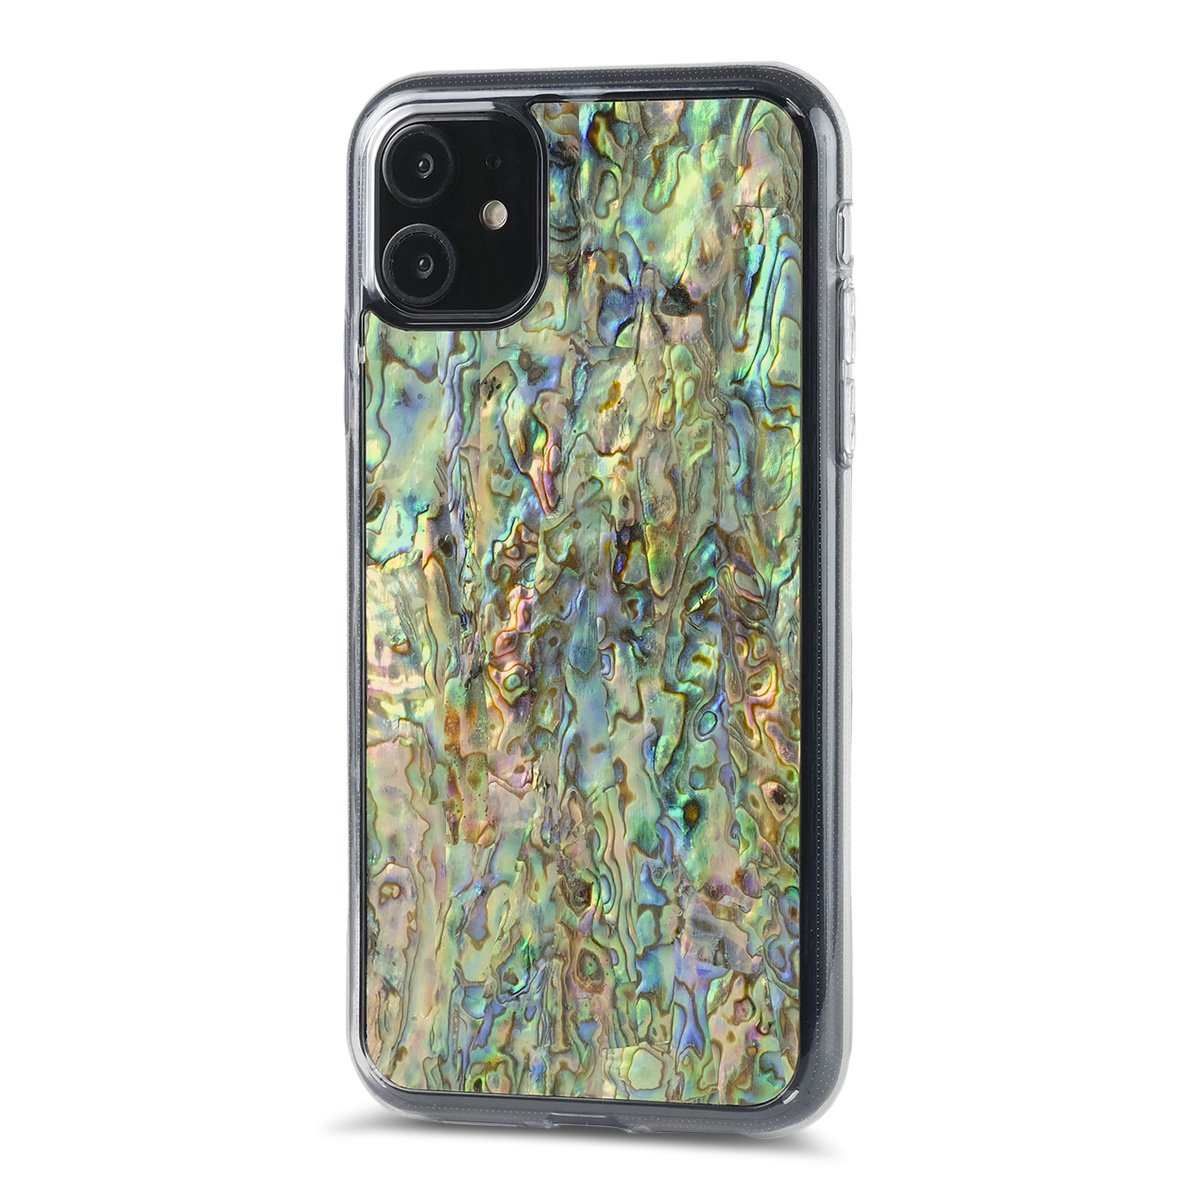 Green Abalone Iphone 11 Pro Shell Explorer Case Shell Cases Cover Up